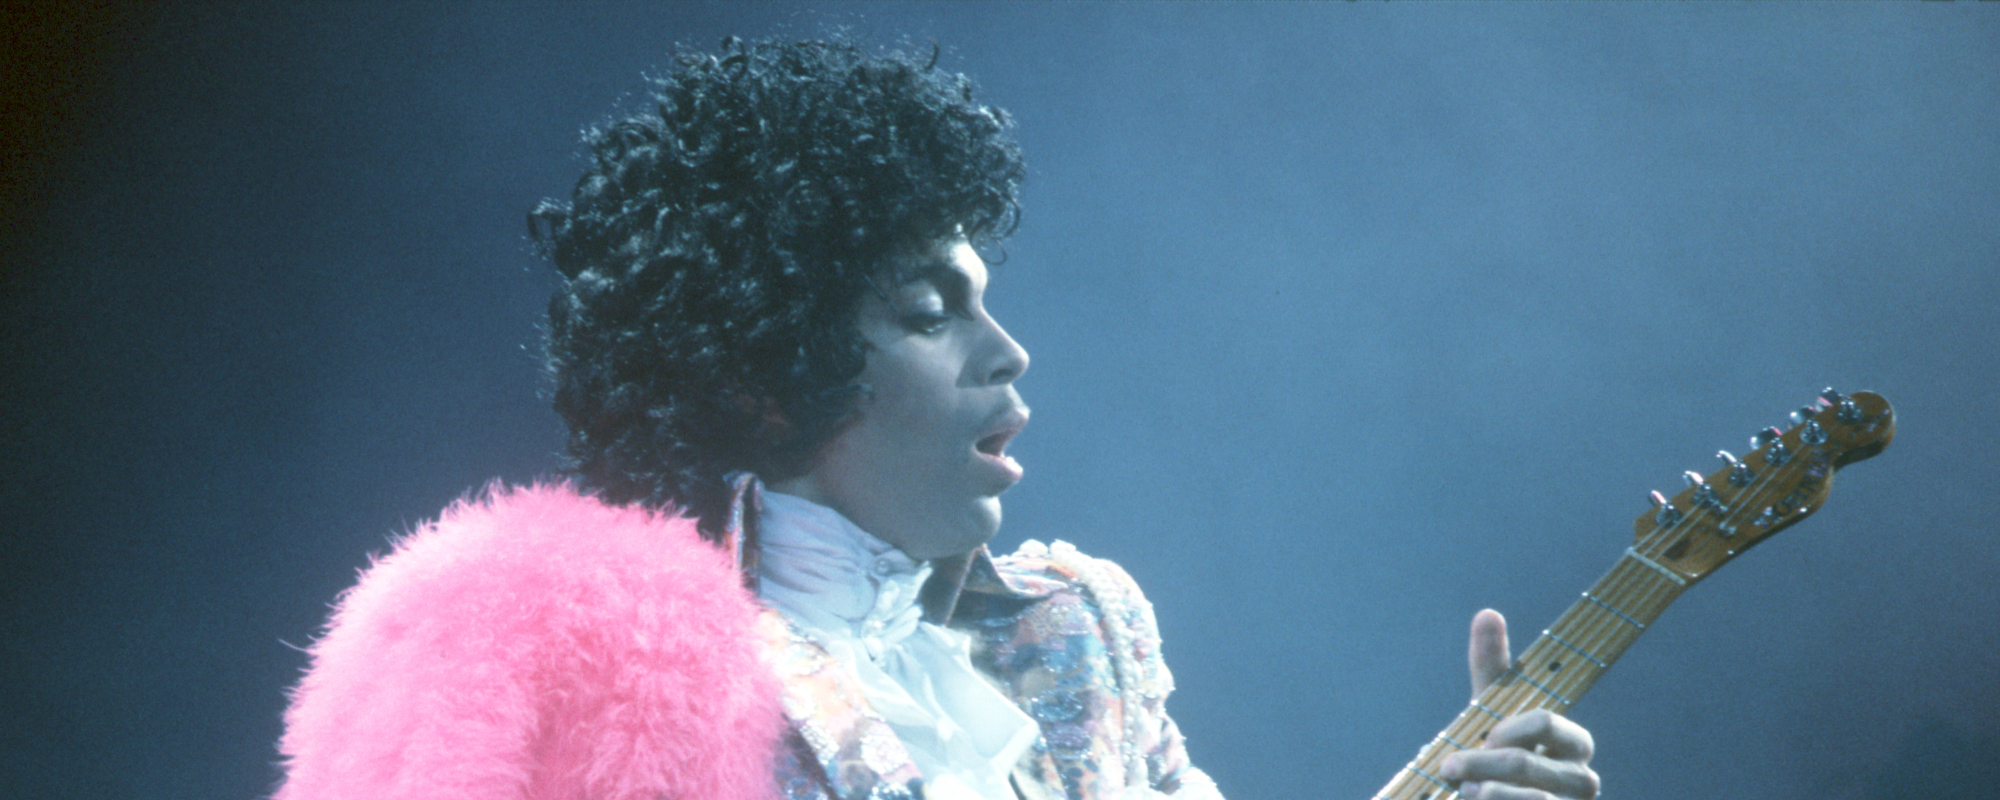 A “Finger-Wagging Scold”: The Meaning Behind “Pop Life” by Prince